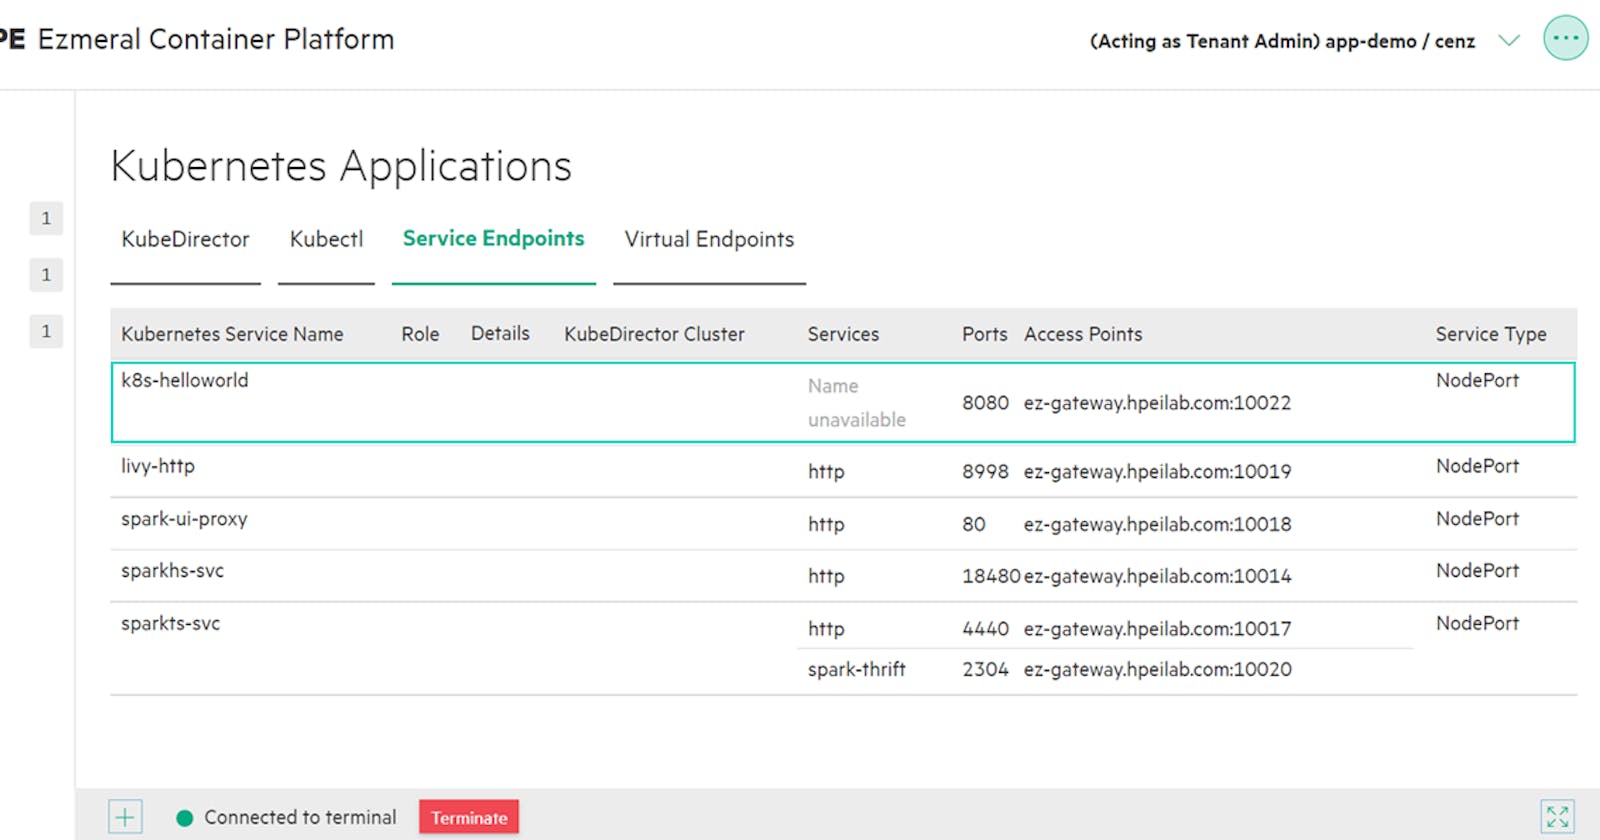 [HPE Dev] Mapping Kubernetes Services to HPE Ezmeral Runtime Enterprise Gateway